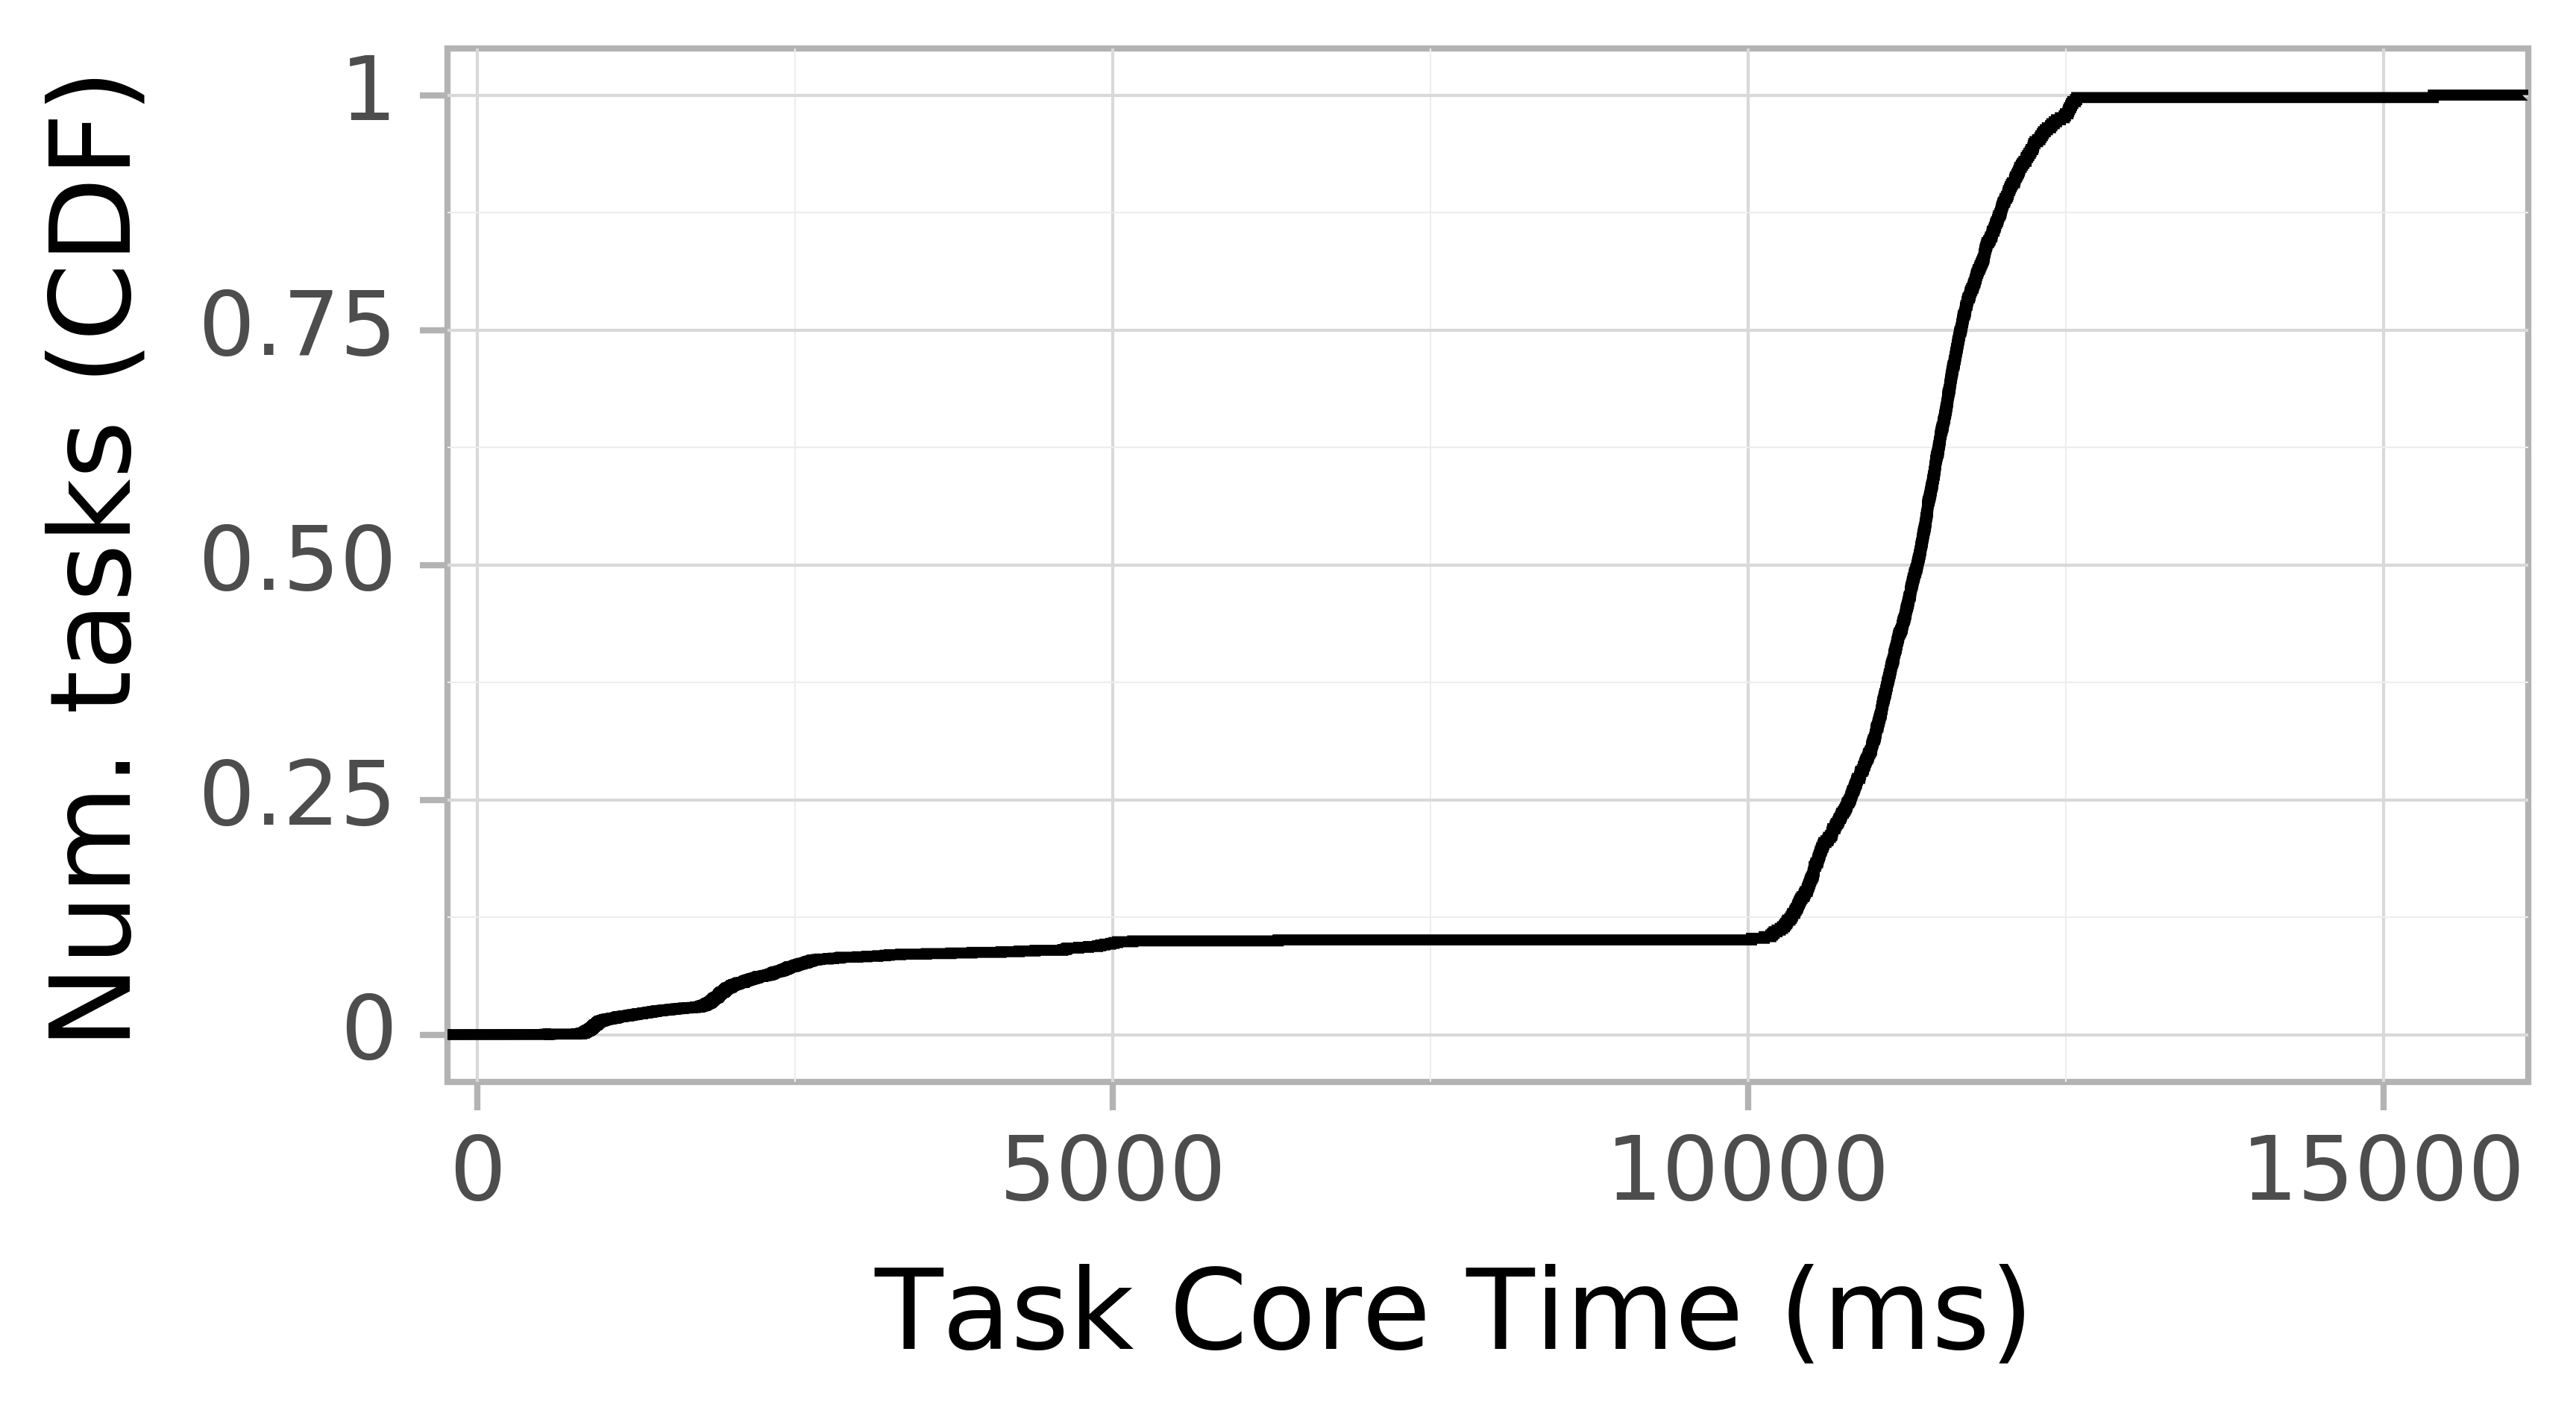 task resource time CDF graph for the askalon-new_ee52 trace.